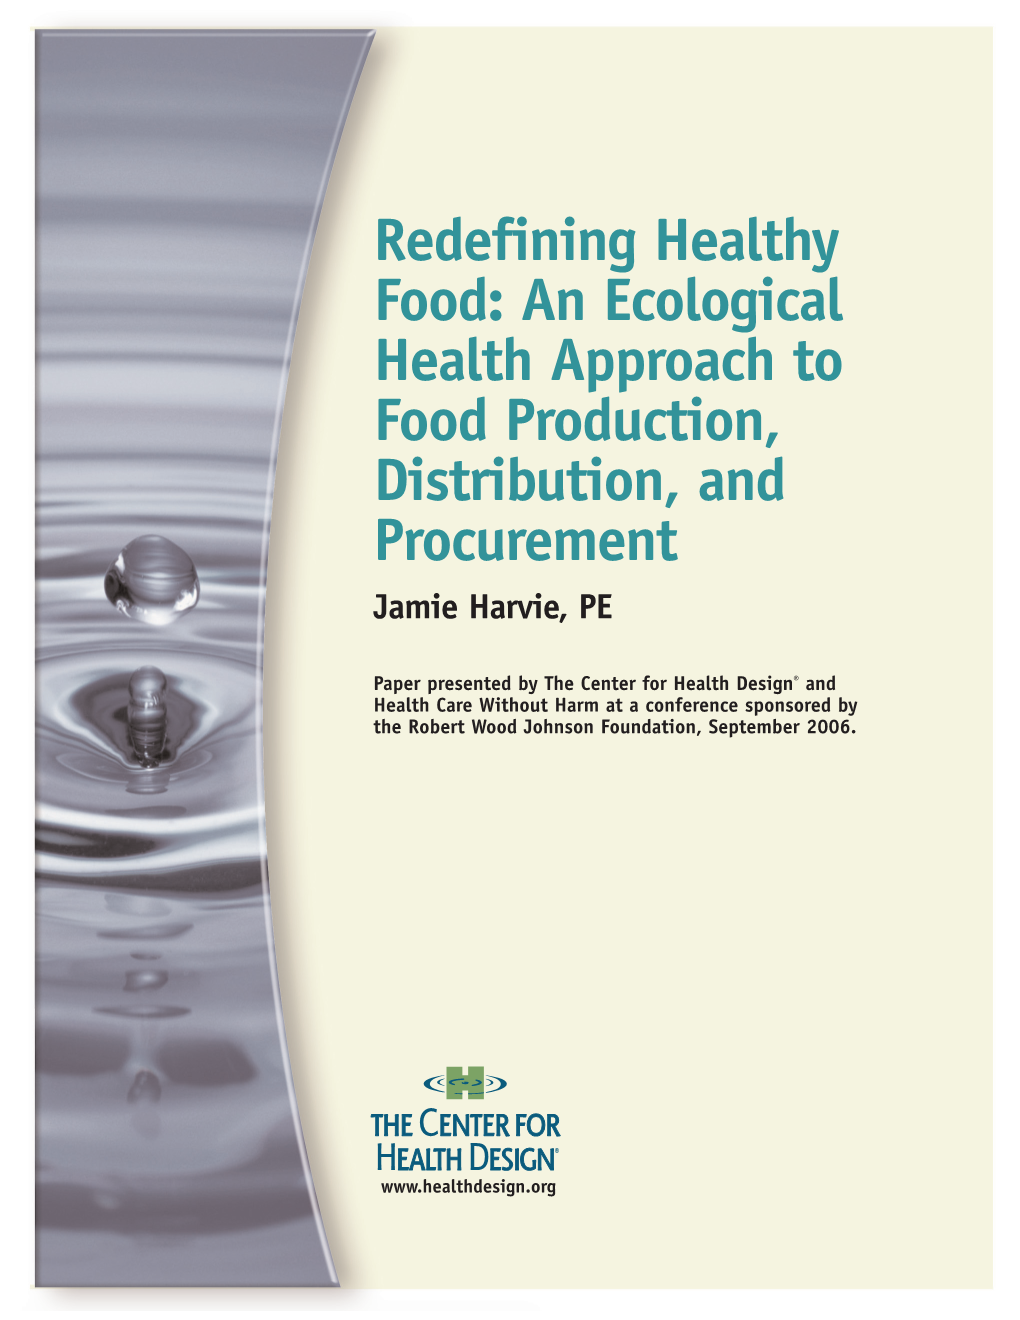 Redefining Healthy Food: an Ecological Health Approach to Food Production, Distribution, and Procurement Jamie Harvie, PE